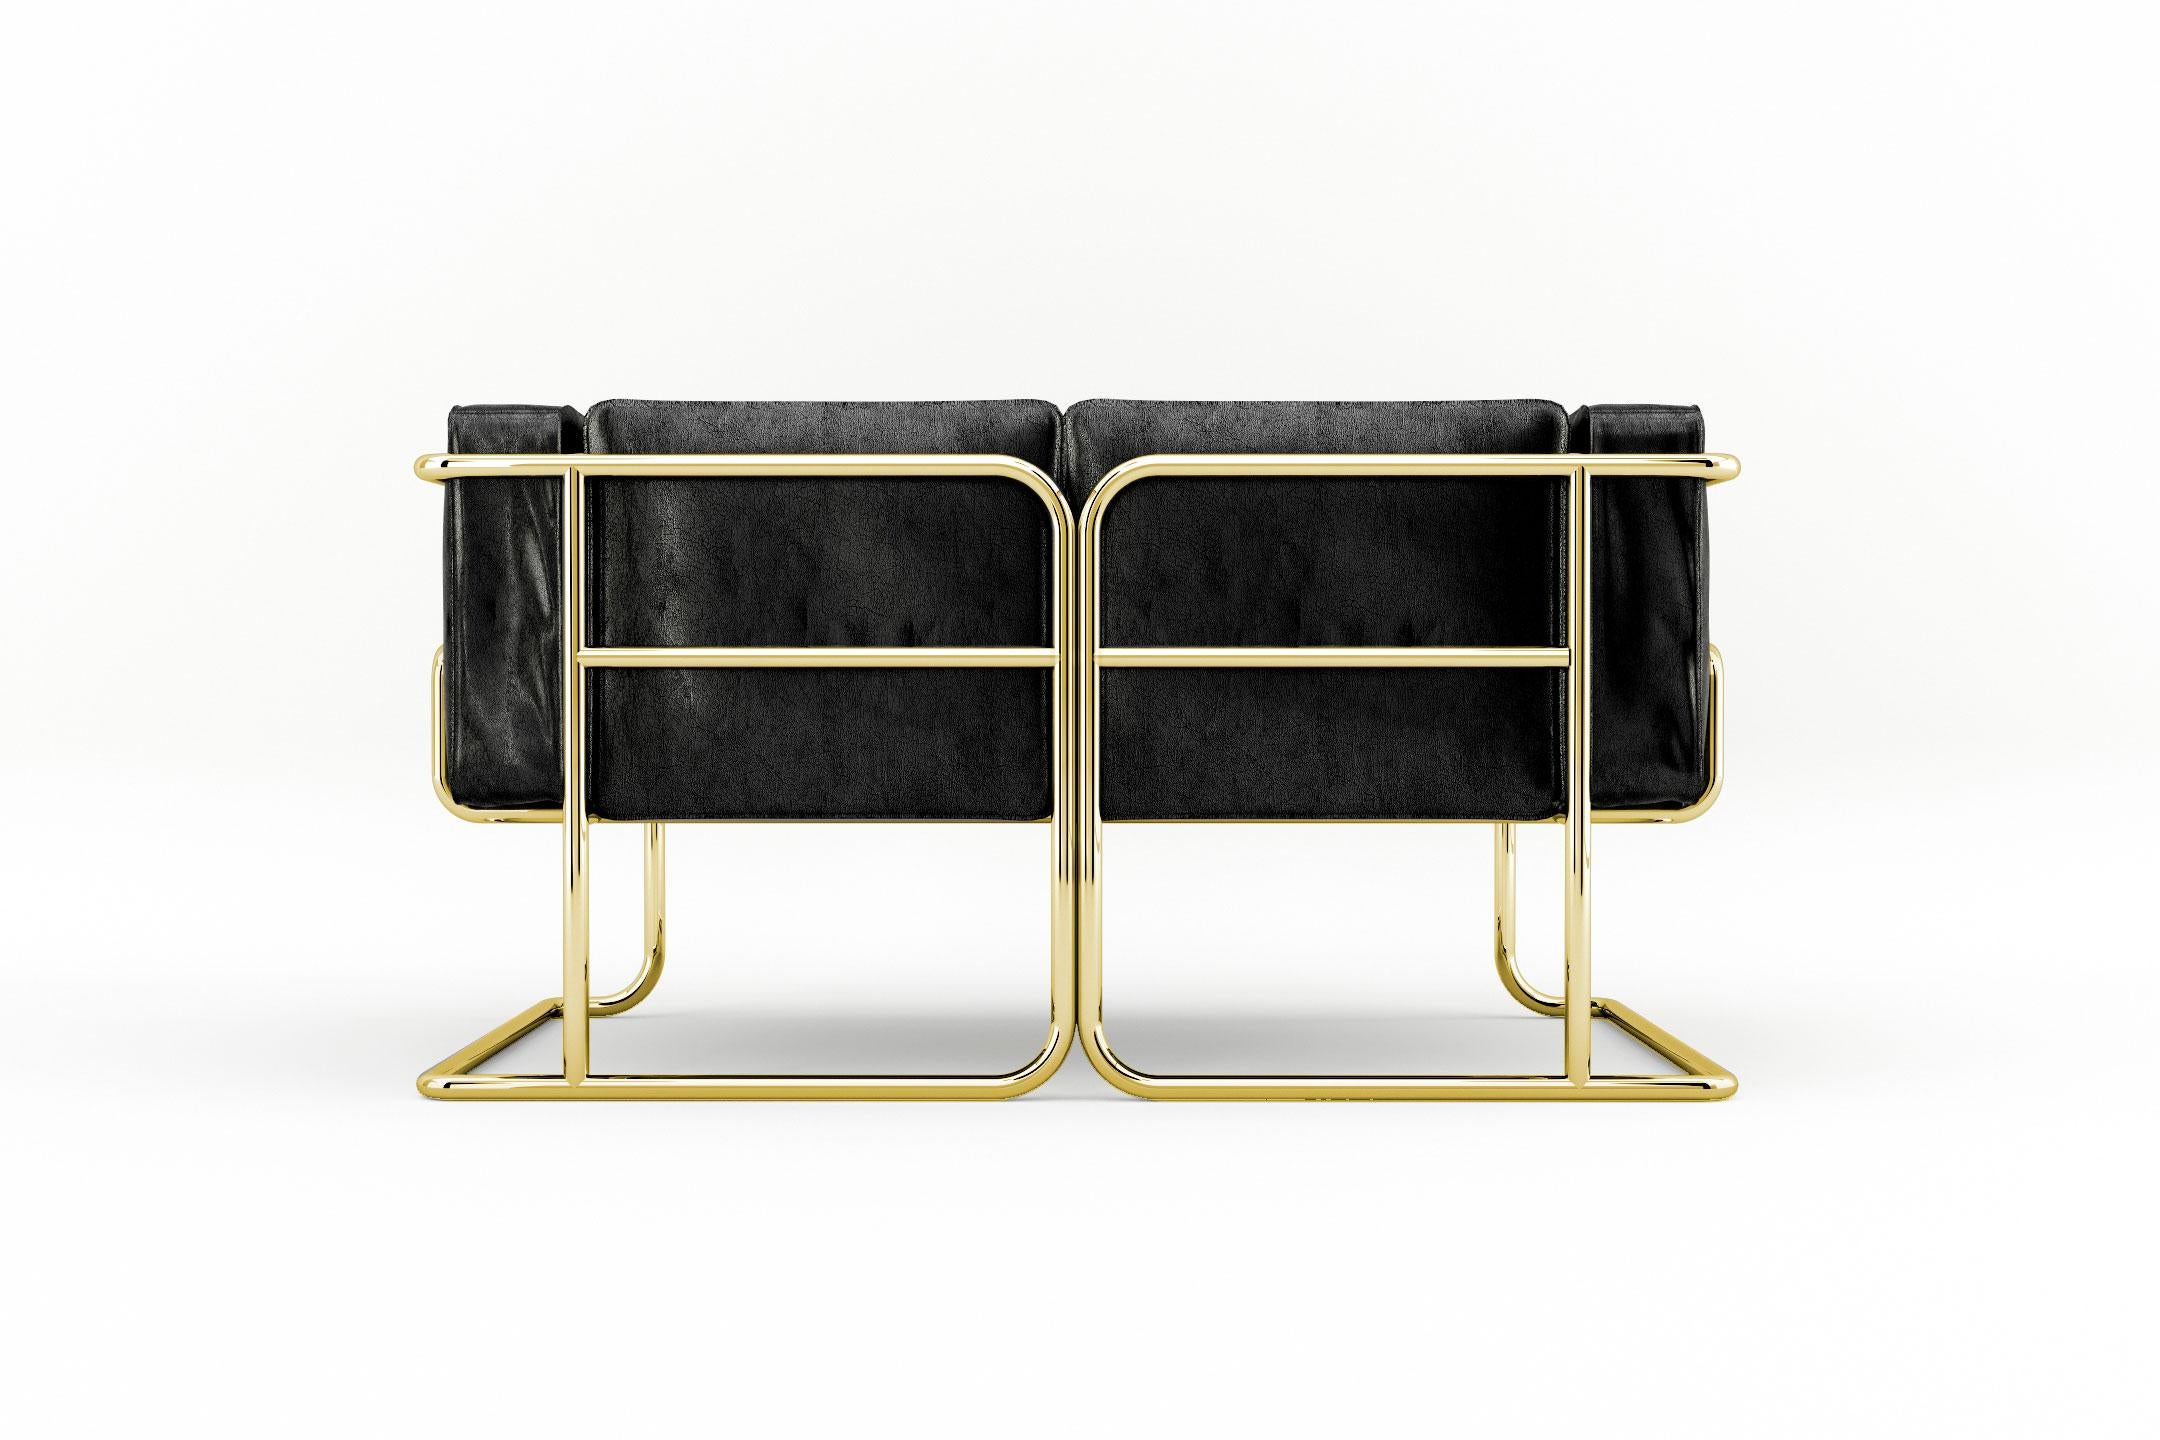 Polished Lotus 2 Seat Sofa - Modern Black Leather Sofa with Brass Legs For Sale